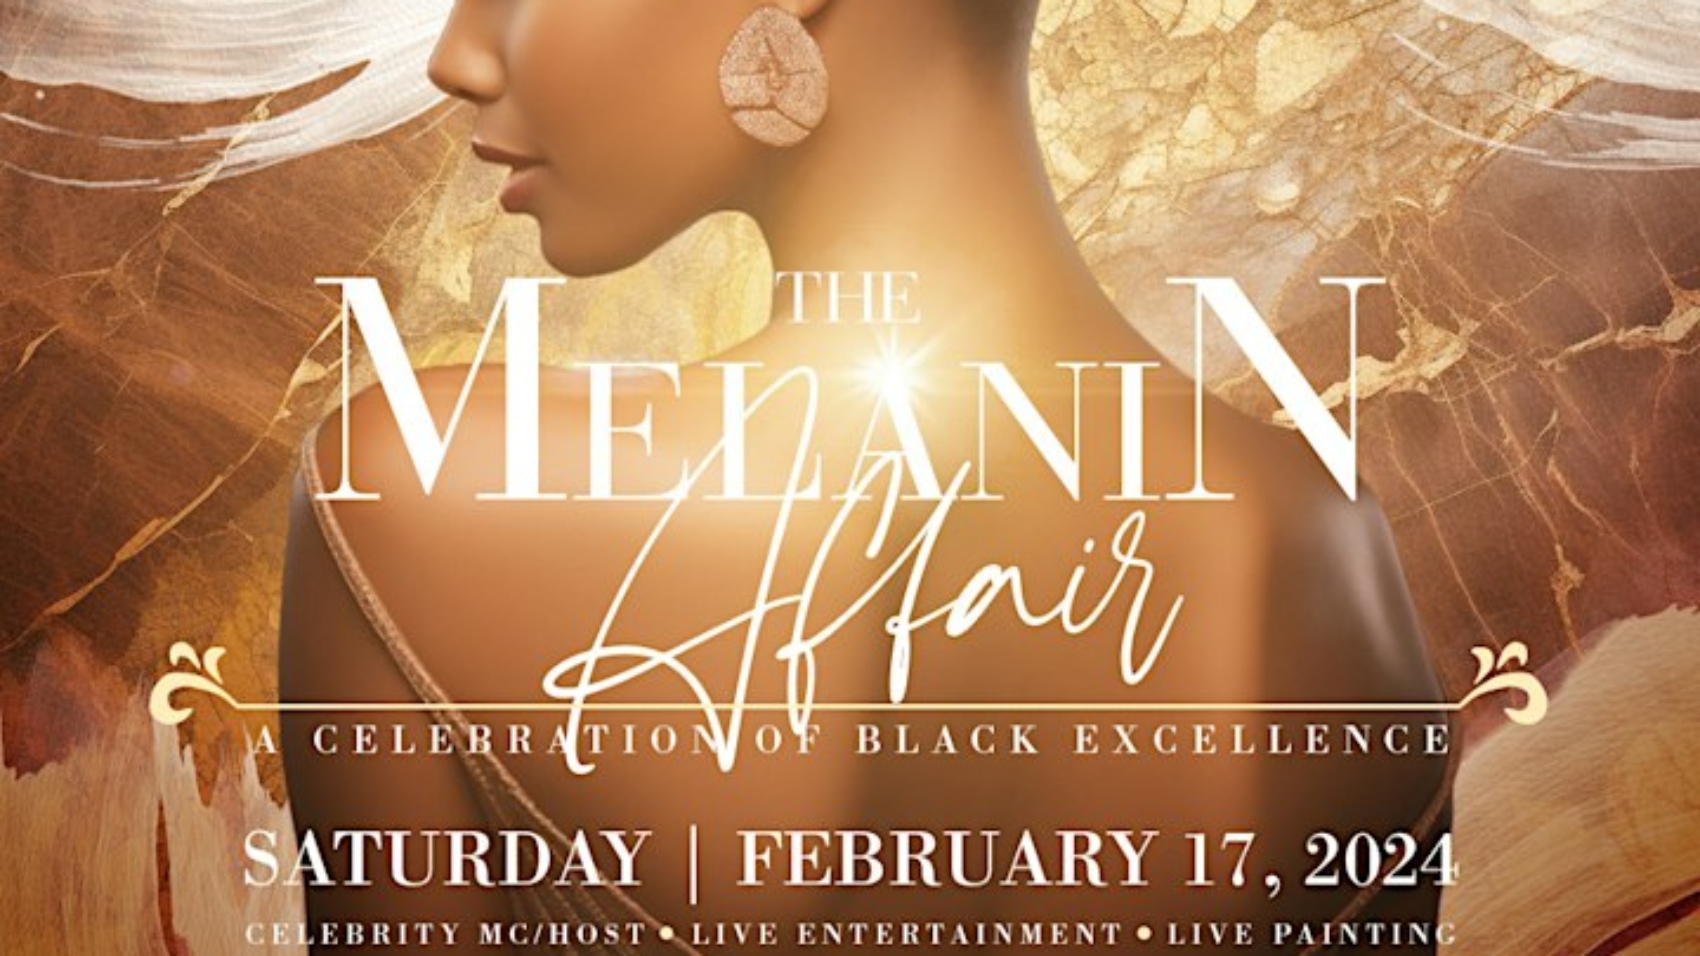 the-melanin-affair-a-celebration-of-black-excellence-tickets